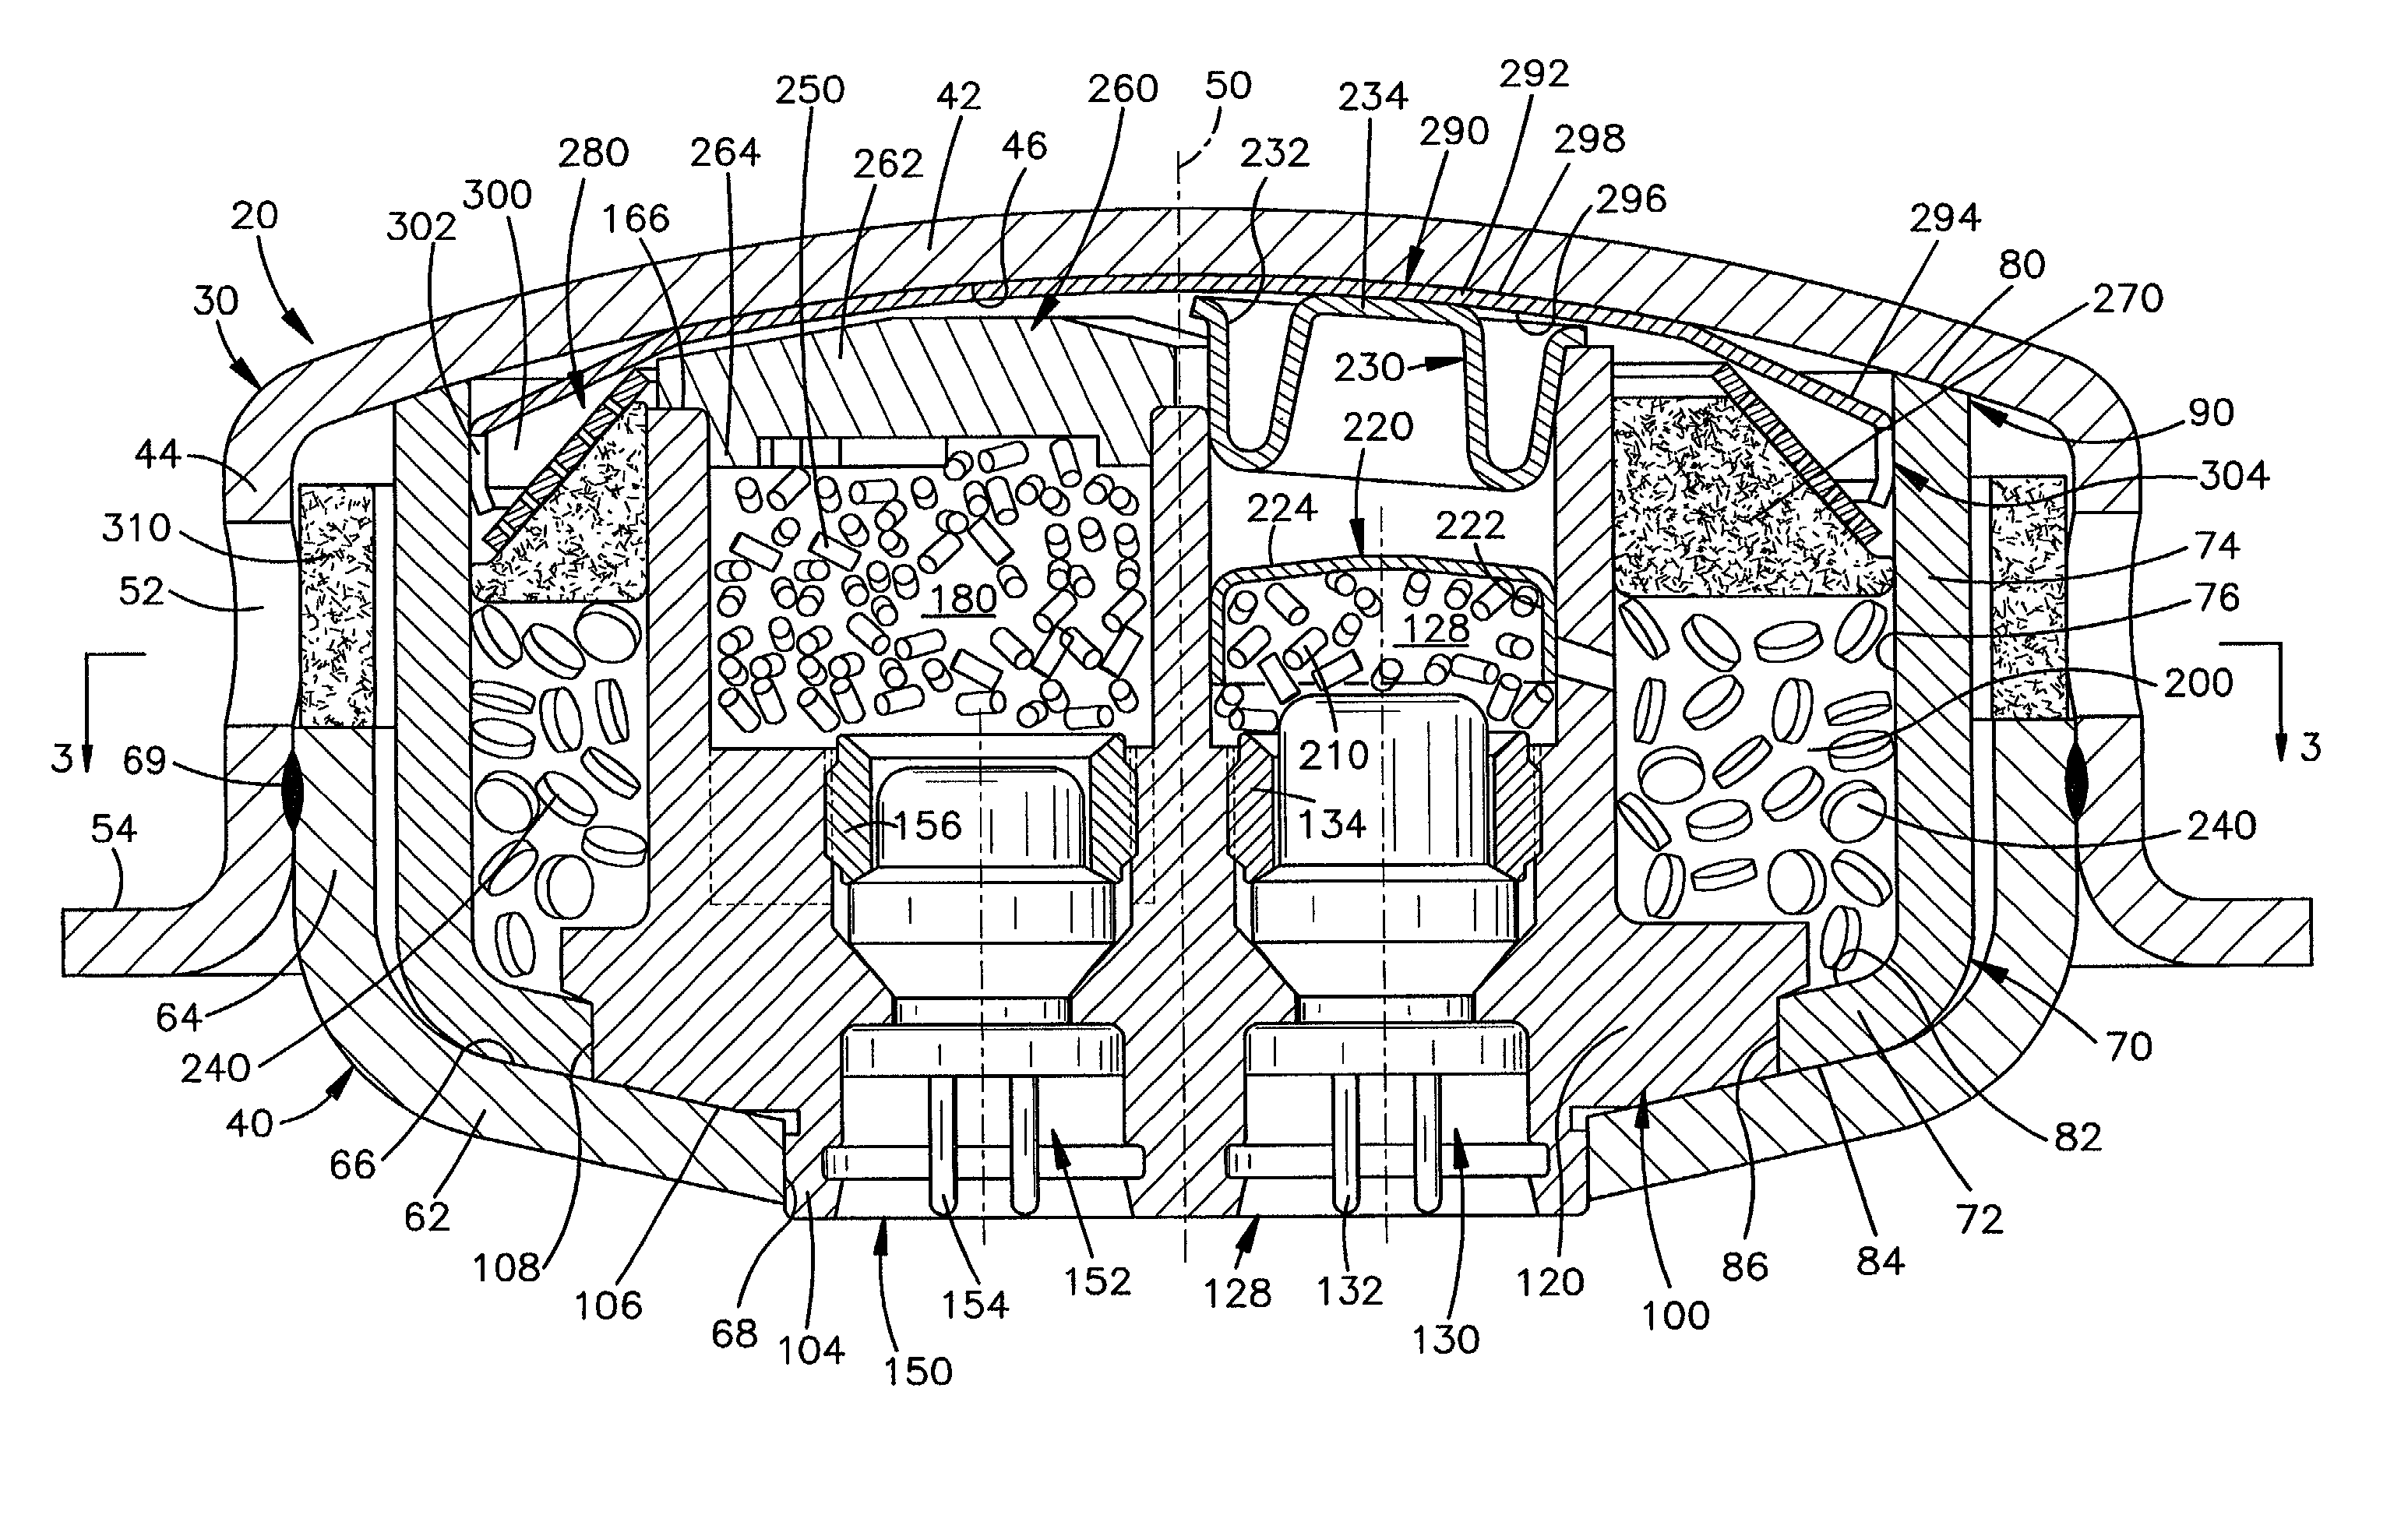 Dual stage air bag inflator with secondary propellant cap